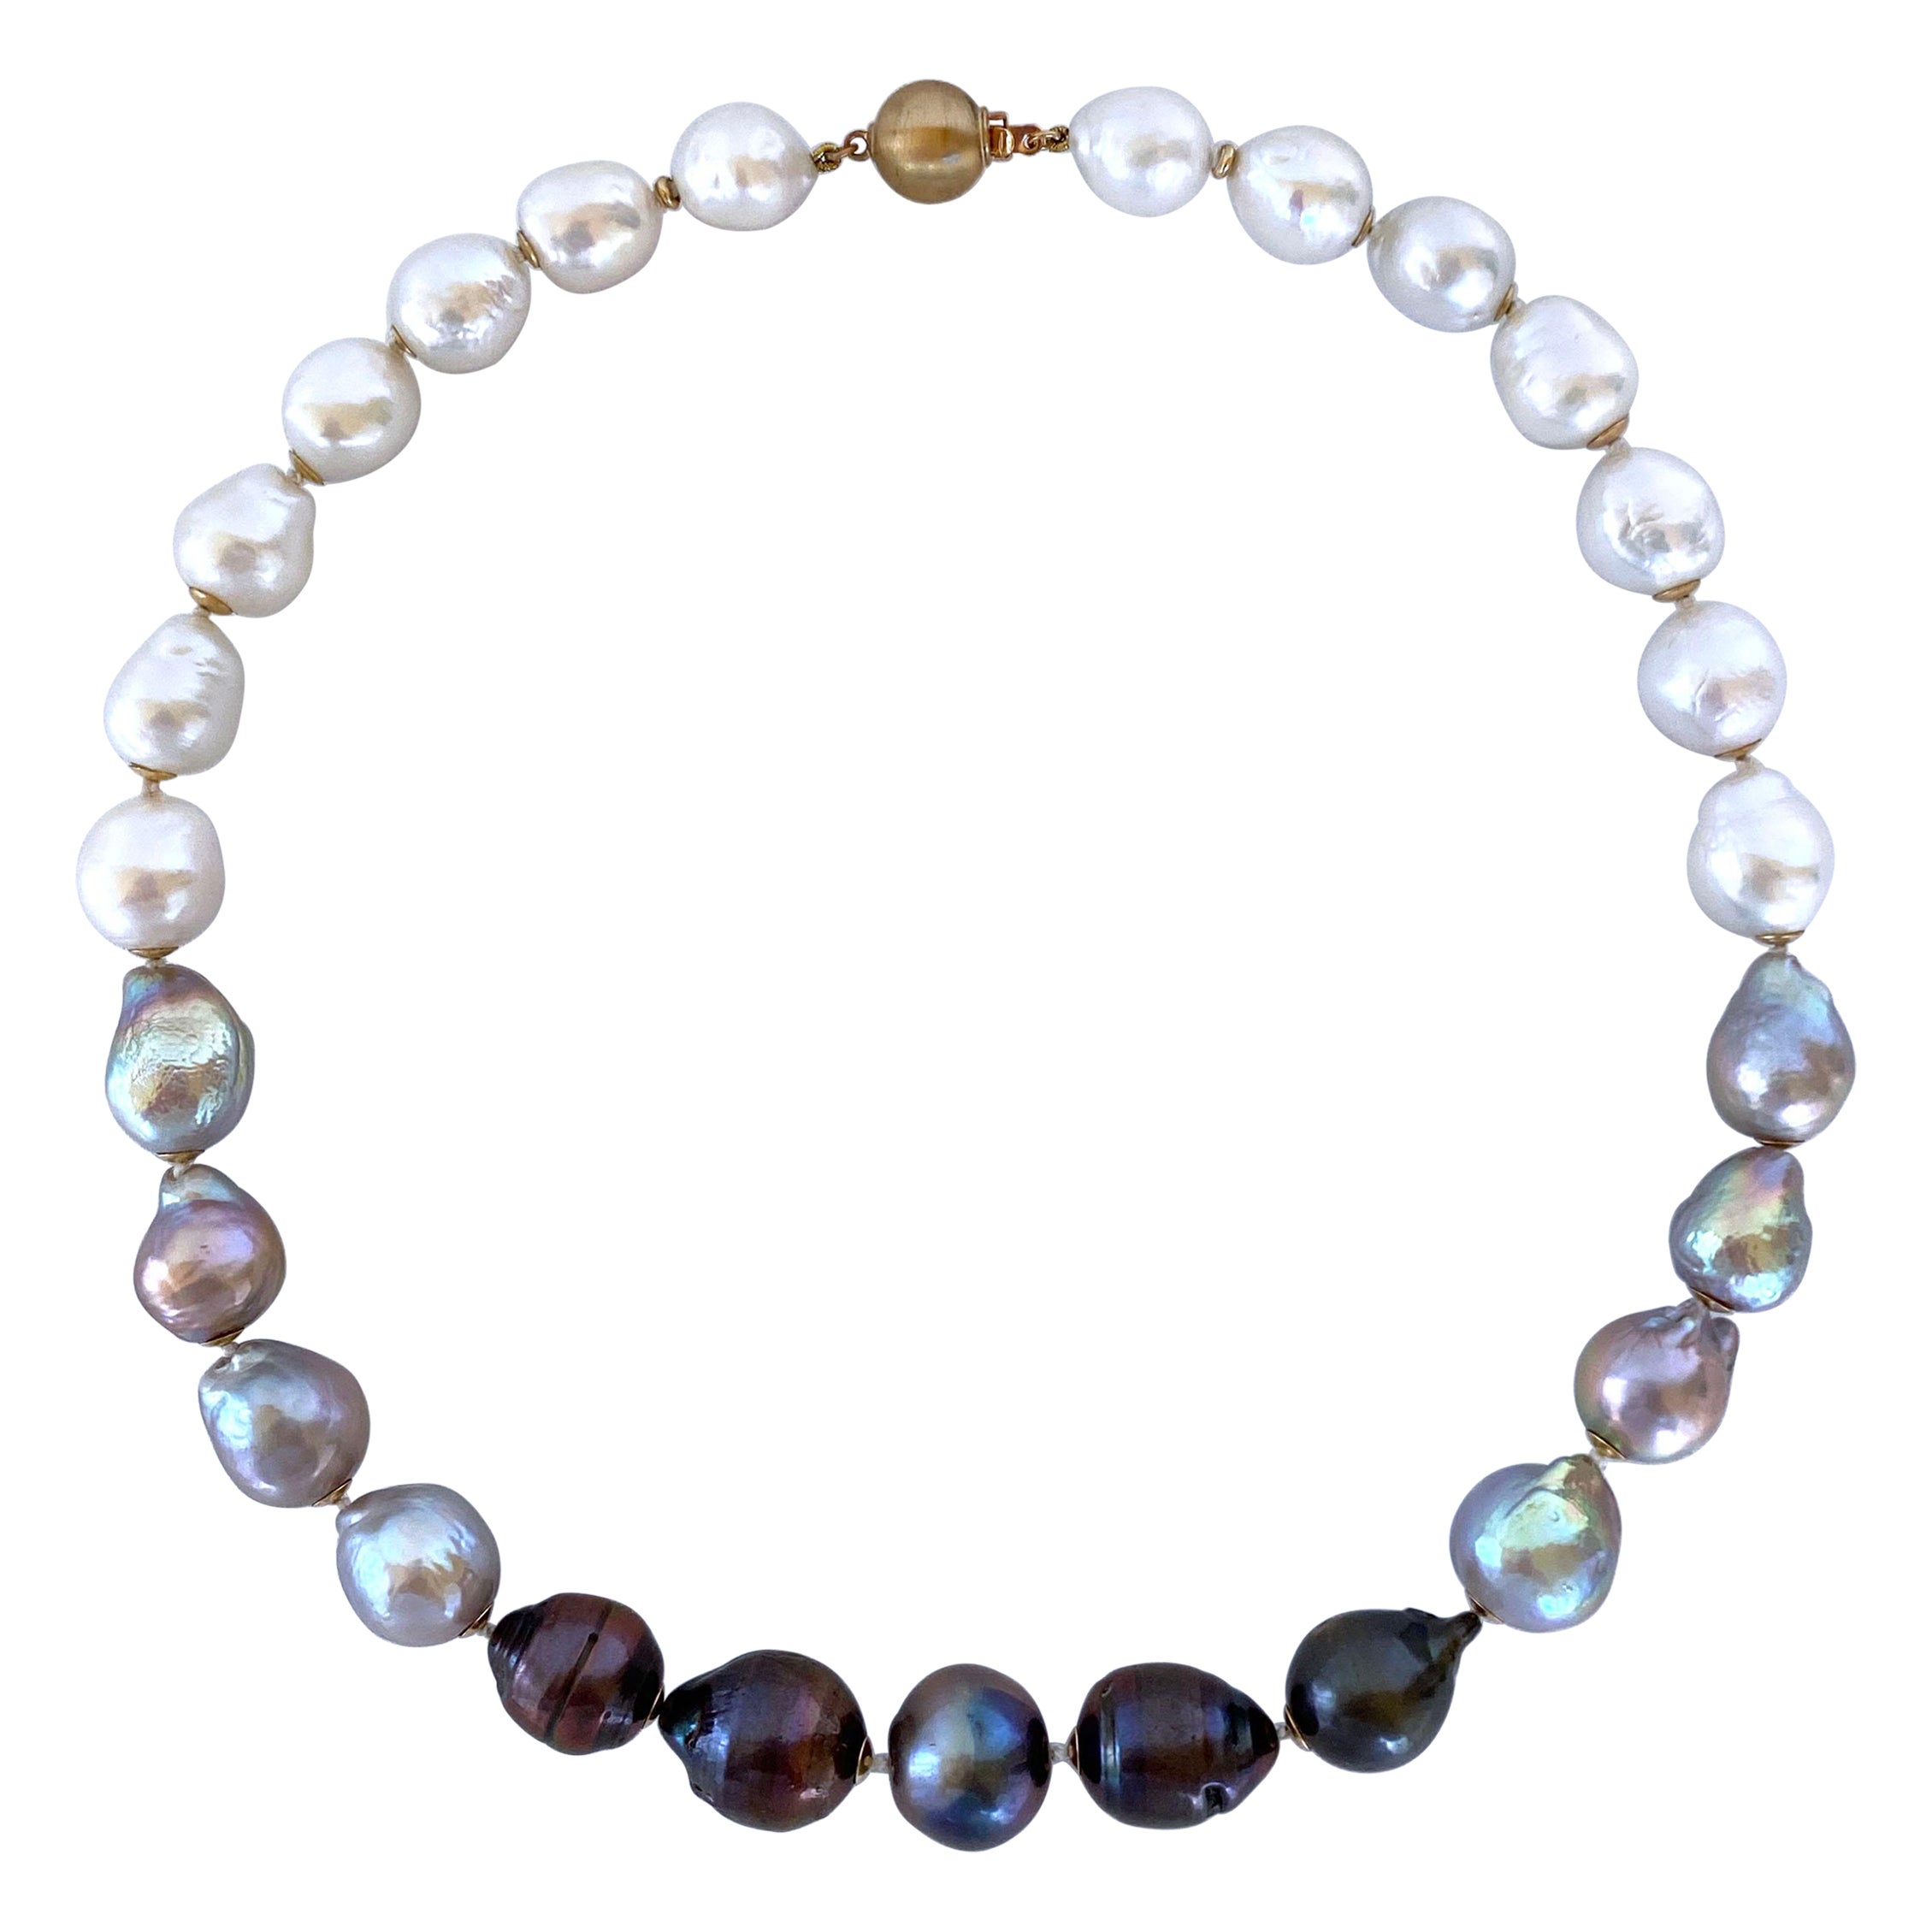 Marina J. Black, White & Grey Graduated Ombre Pearl Necklace with 14K Gold Clasp For Sale